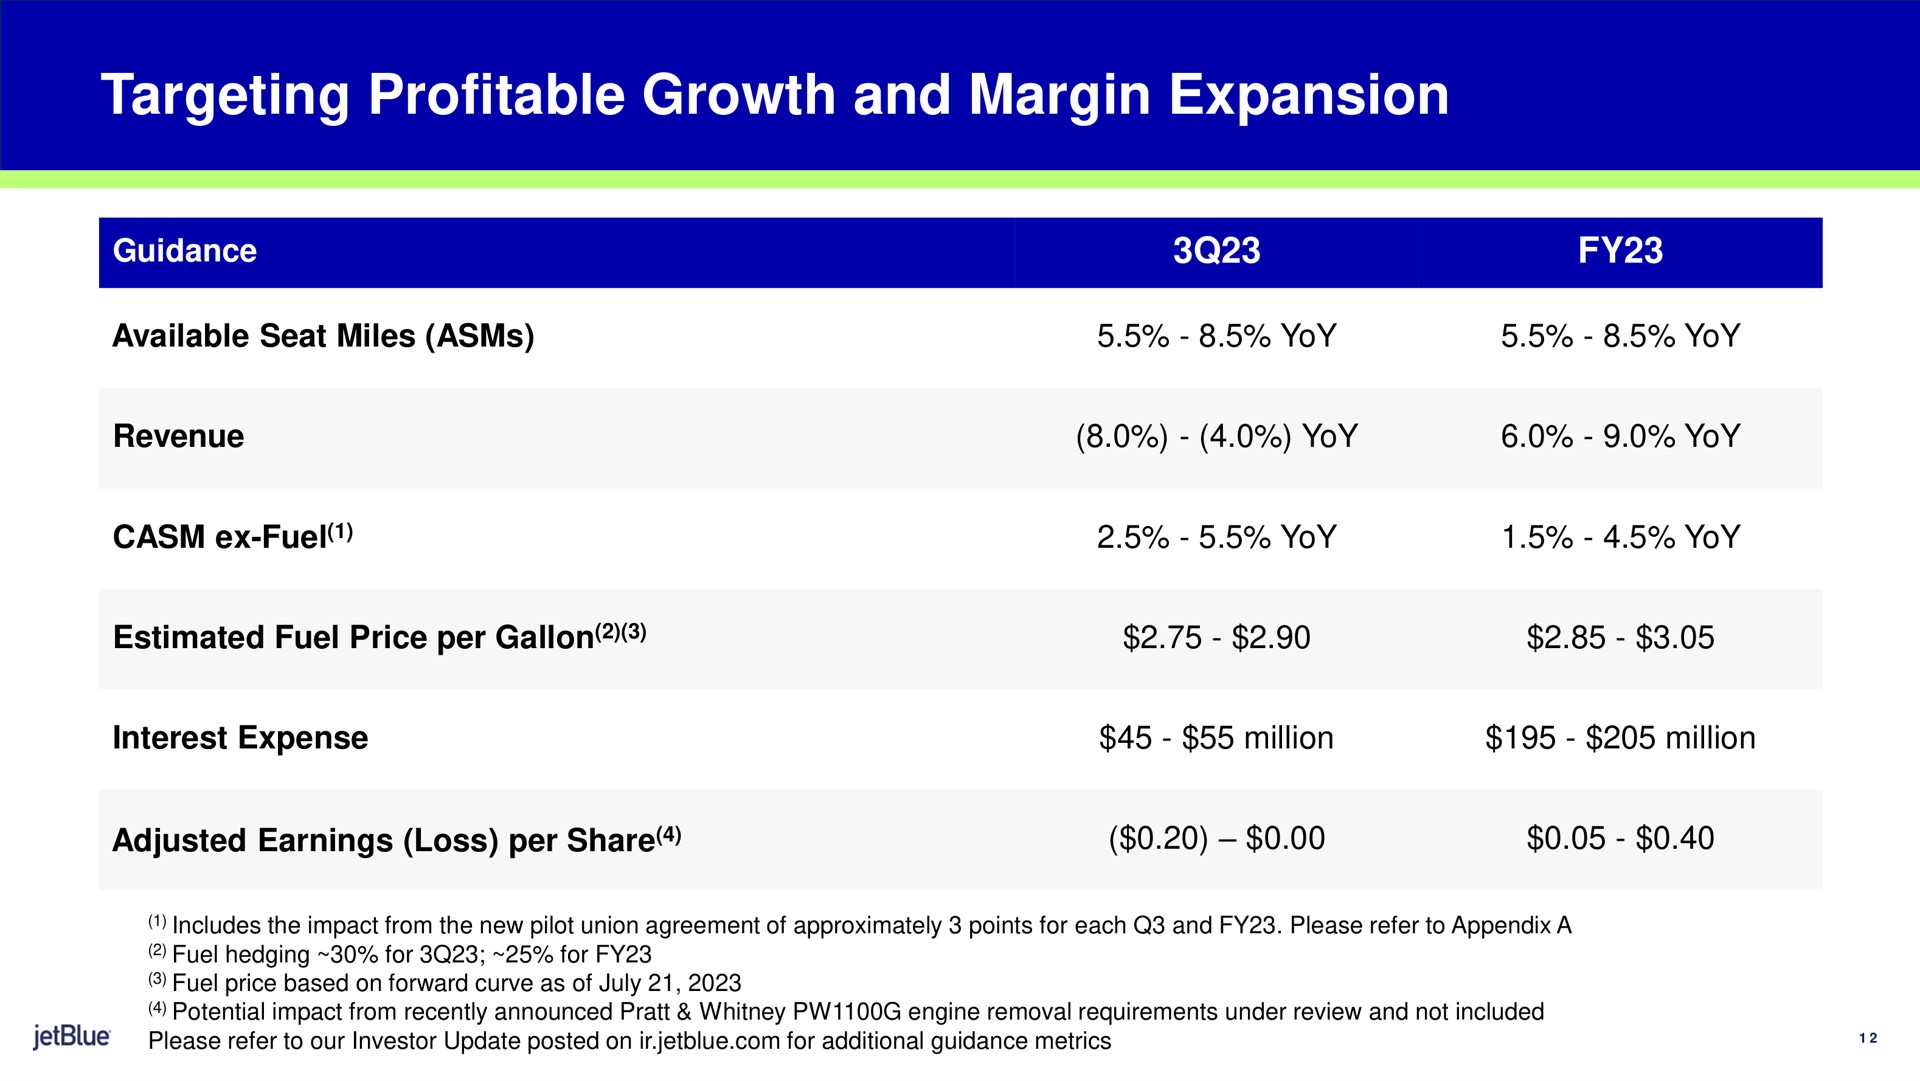 targeting profitable growth and margin expansion guidance available seat miles yoy yoy revenue fuel yoy yoy yoy yoy estimated fuel price per gallon interest expense million million adjusted earnings loss per share | jetBlue